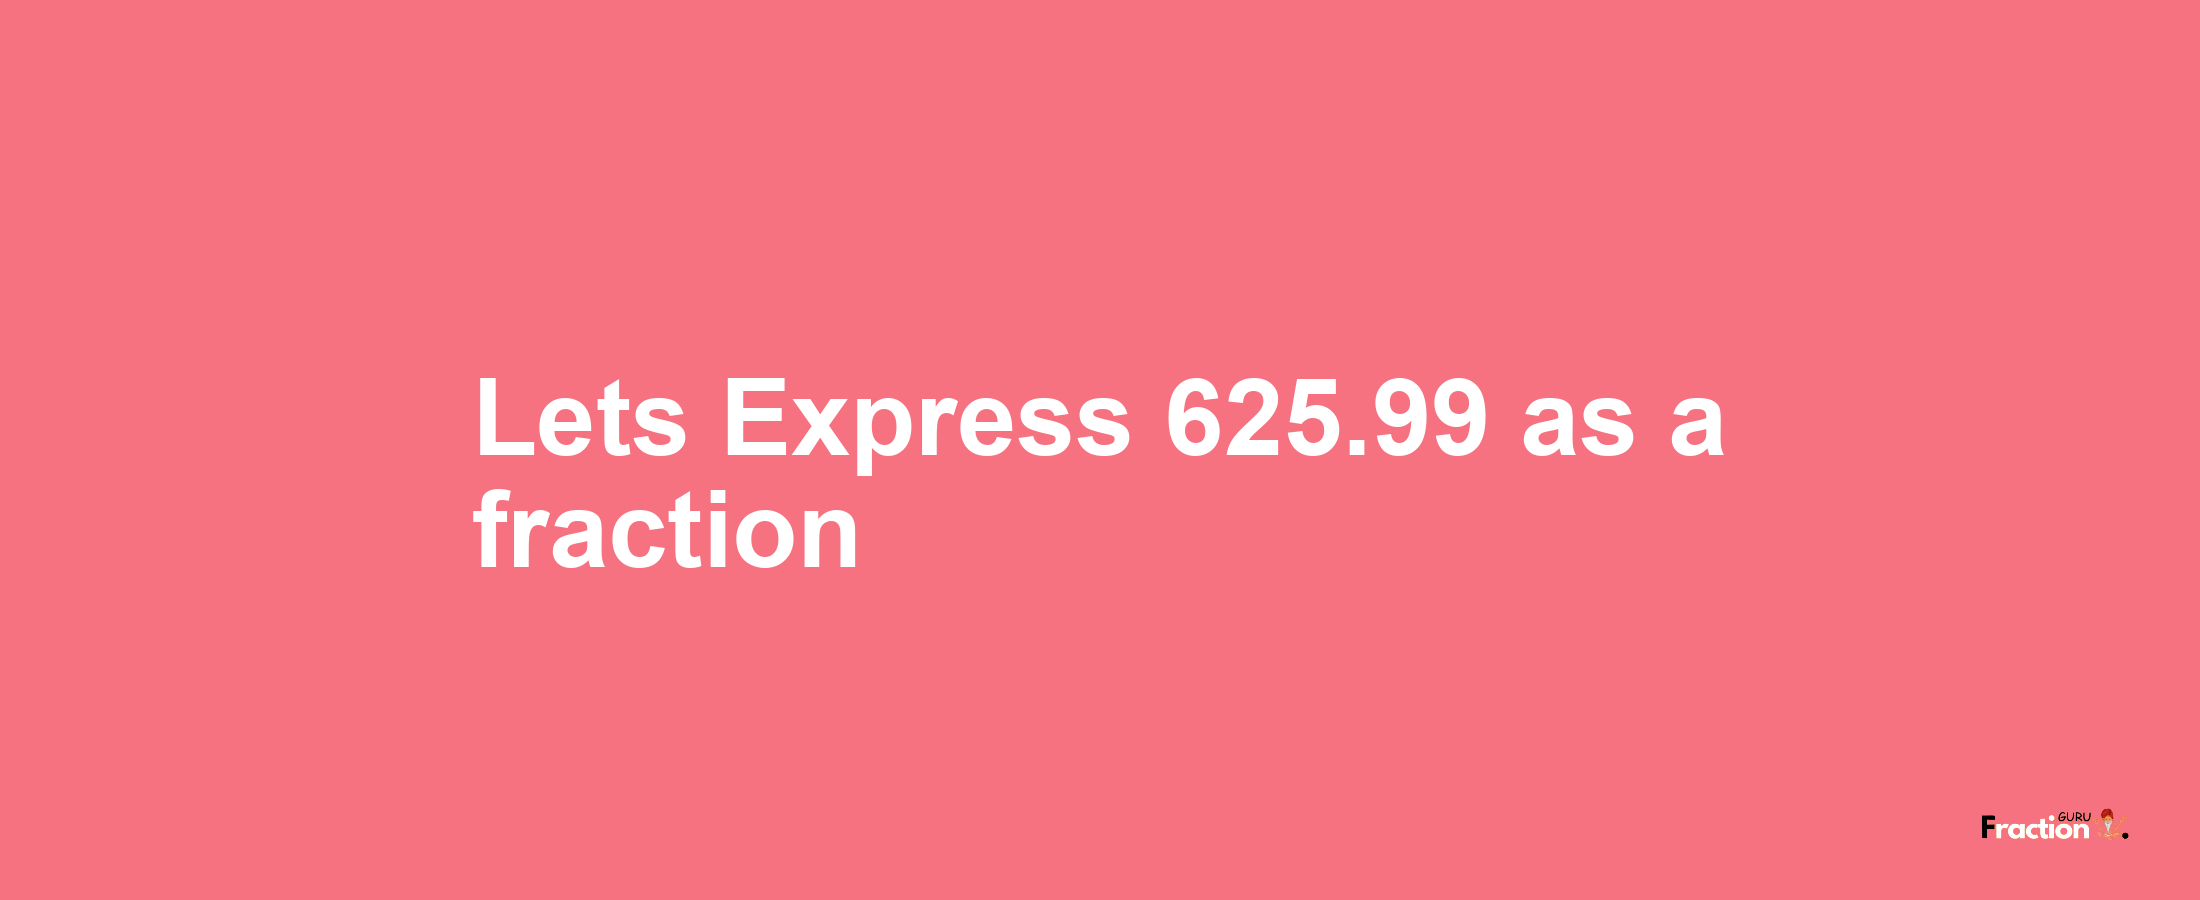 Lets Express 625.99 as afraction